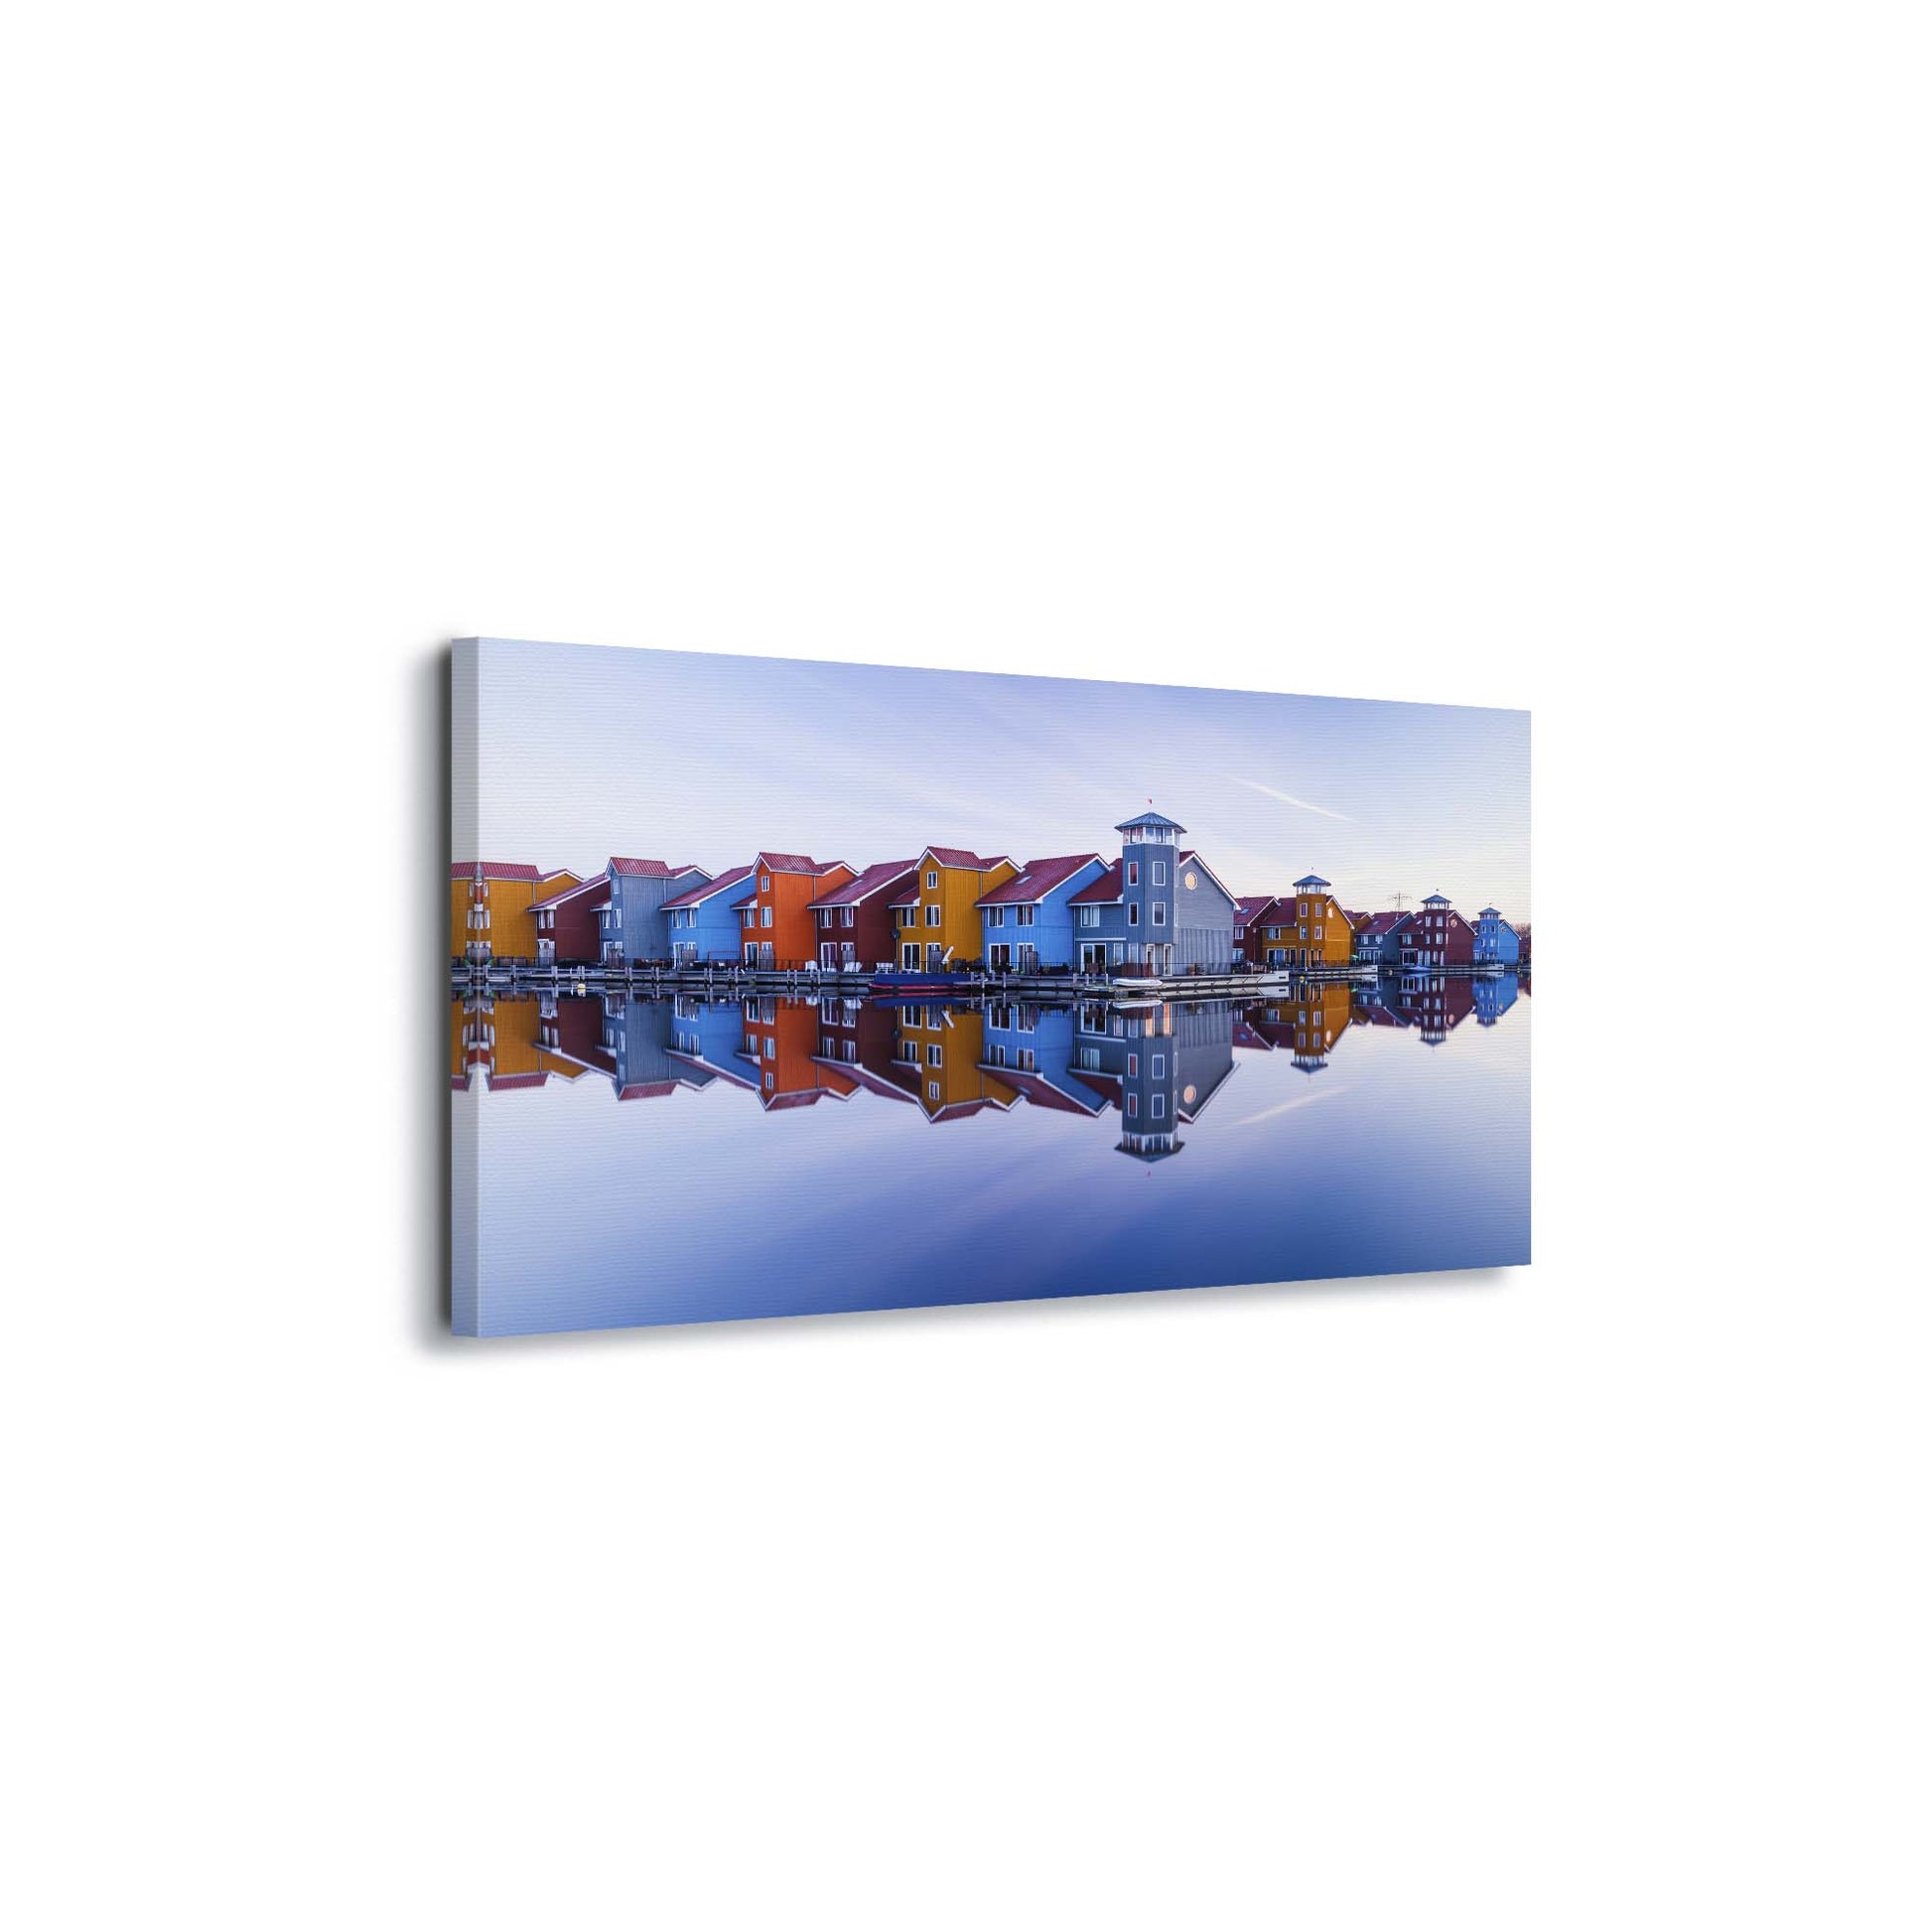 Colored Homes by Ton Drijfhamer Canvas Print - USTAD HOME